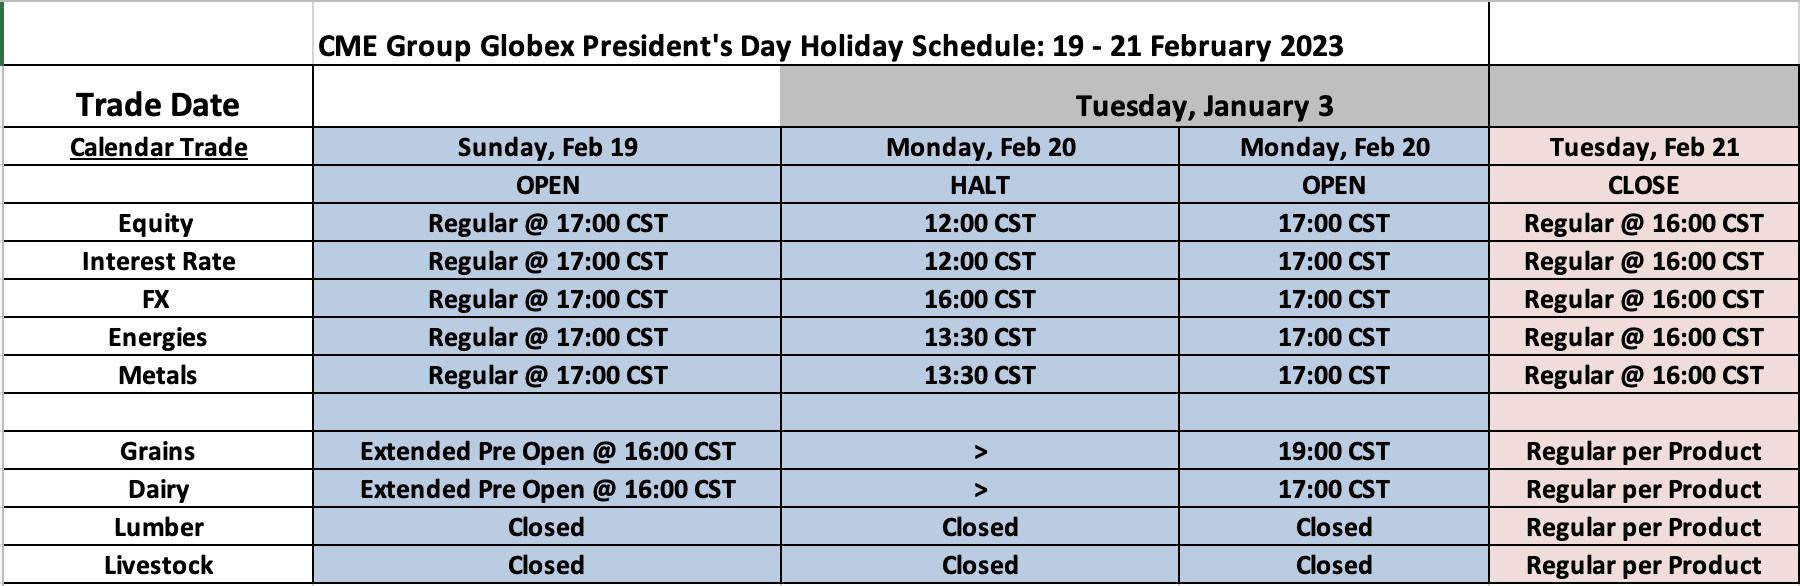 US Presidents' Day Holiday Schedule (2023)